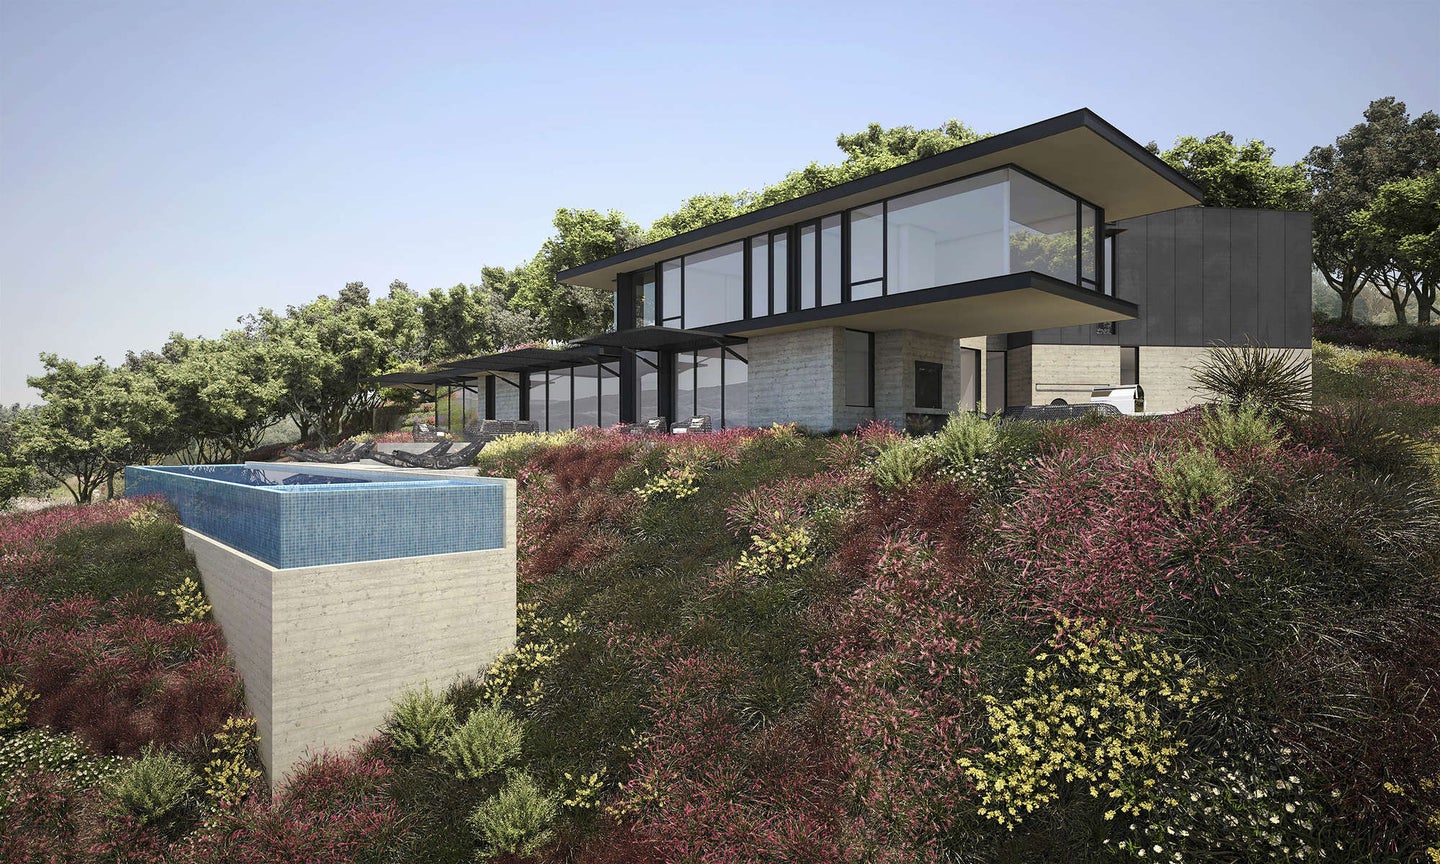 rendering of modular house on hill with shrubland around it